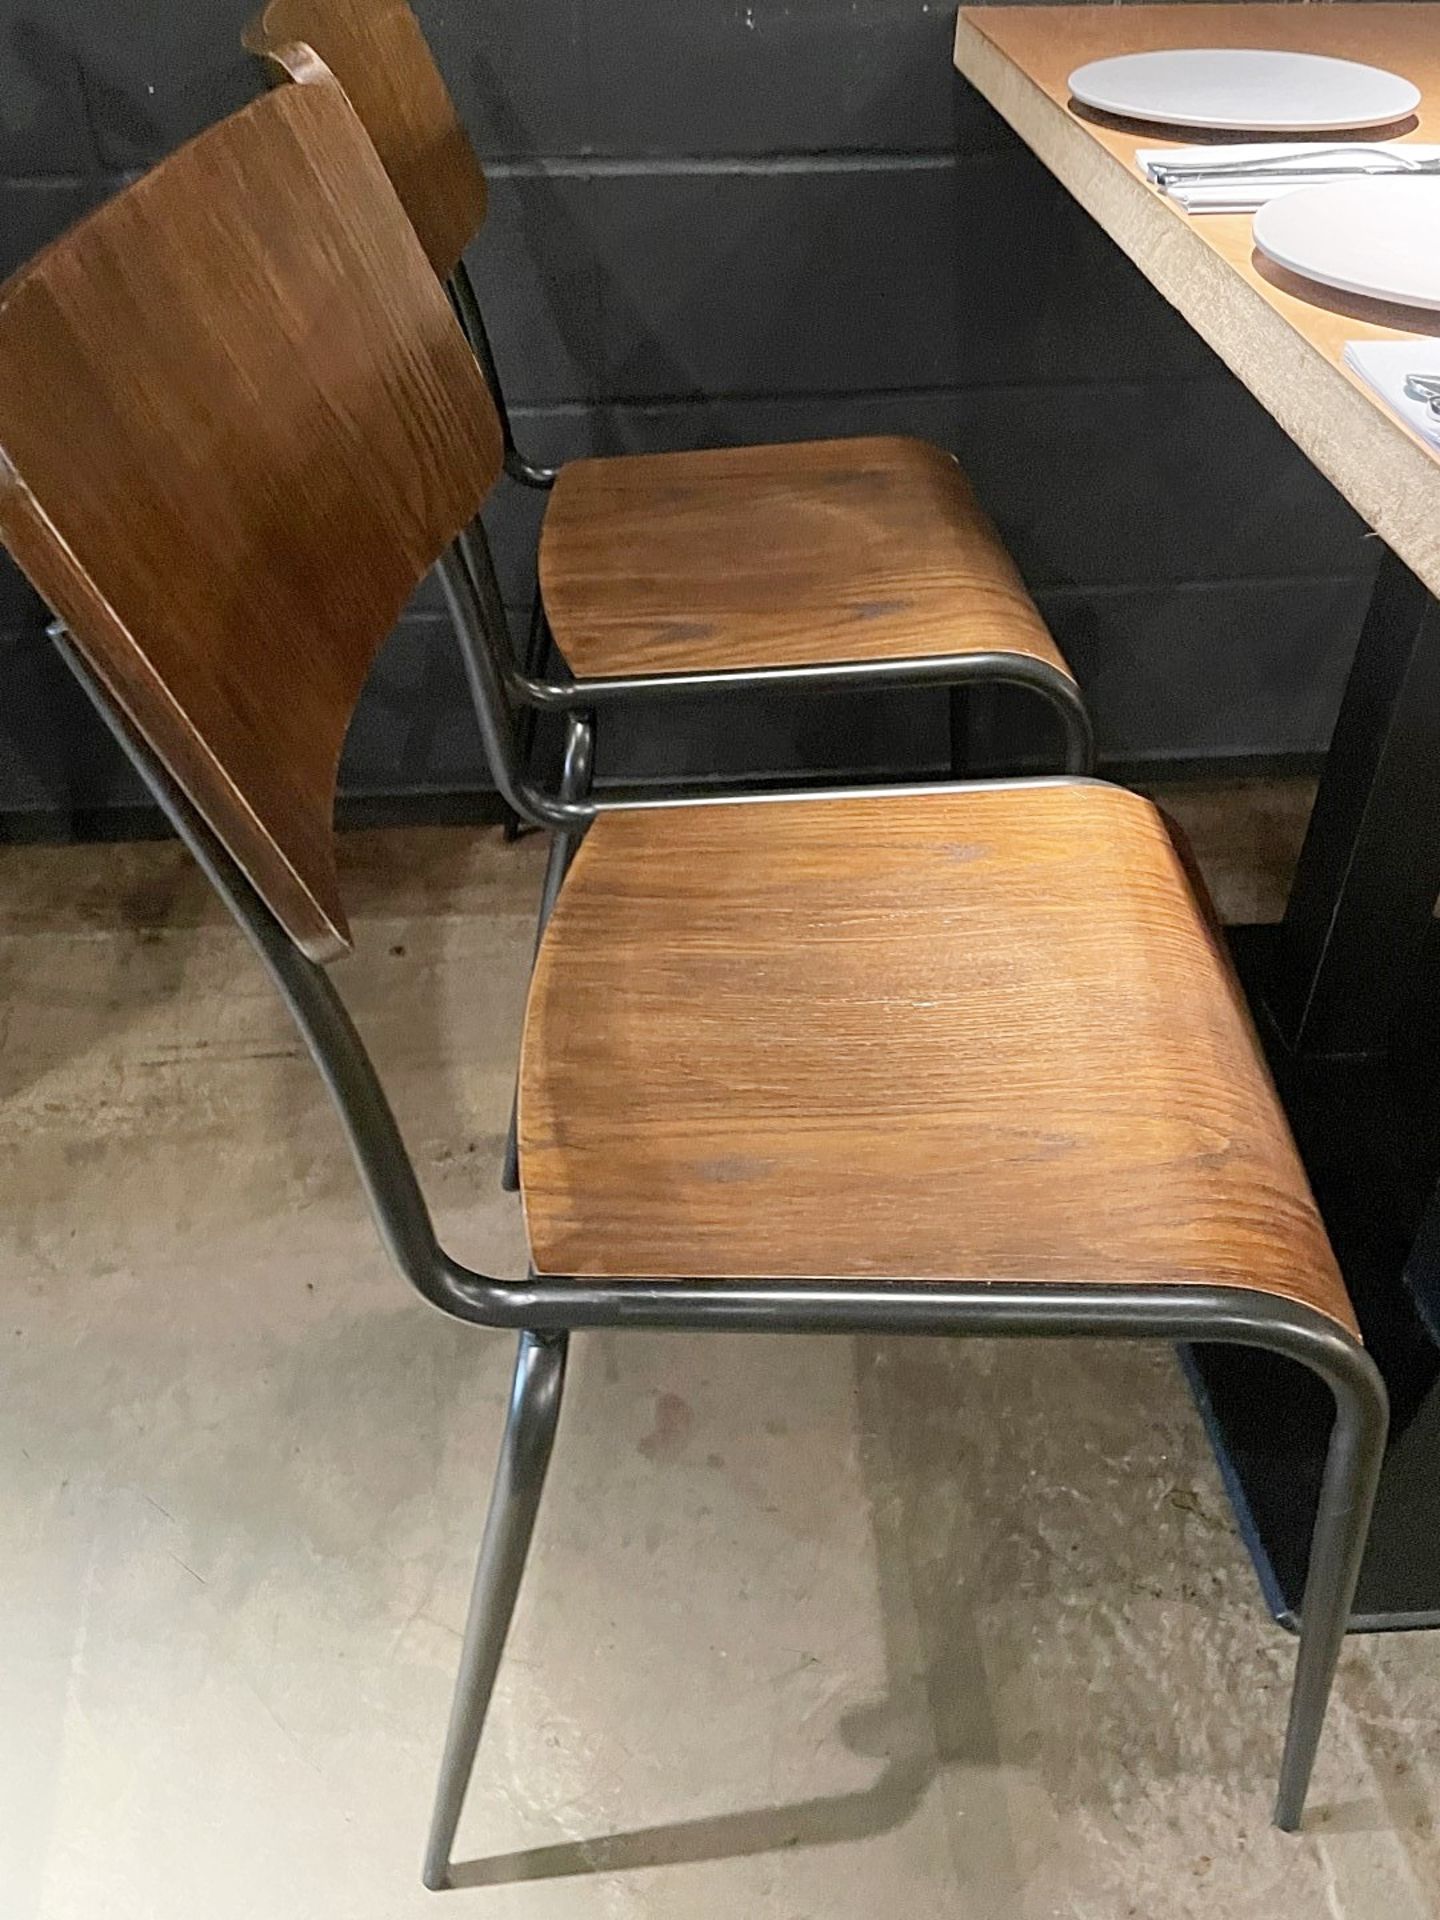 15 x Bistro Dining Chairs Featuring Wooden Back And Seats With Sturdy Metal Frames - Ref: MAN142 - - Image 4 of 8